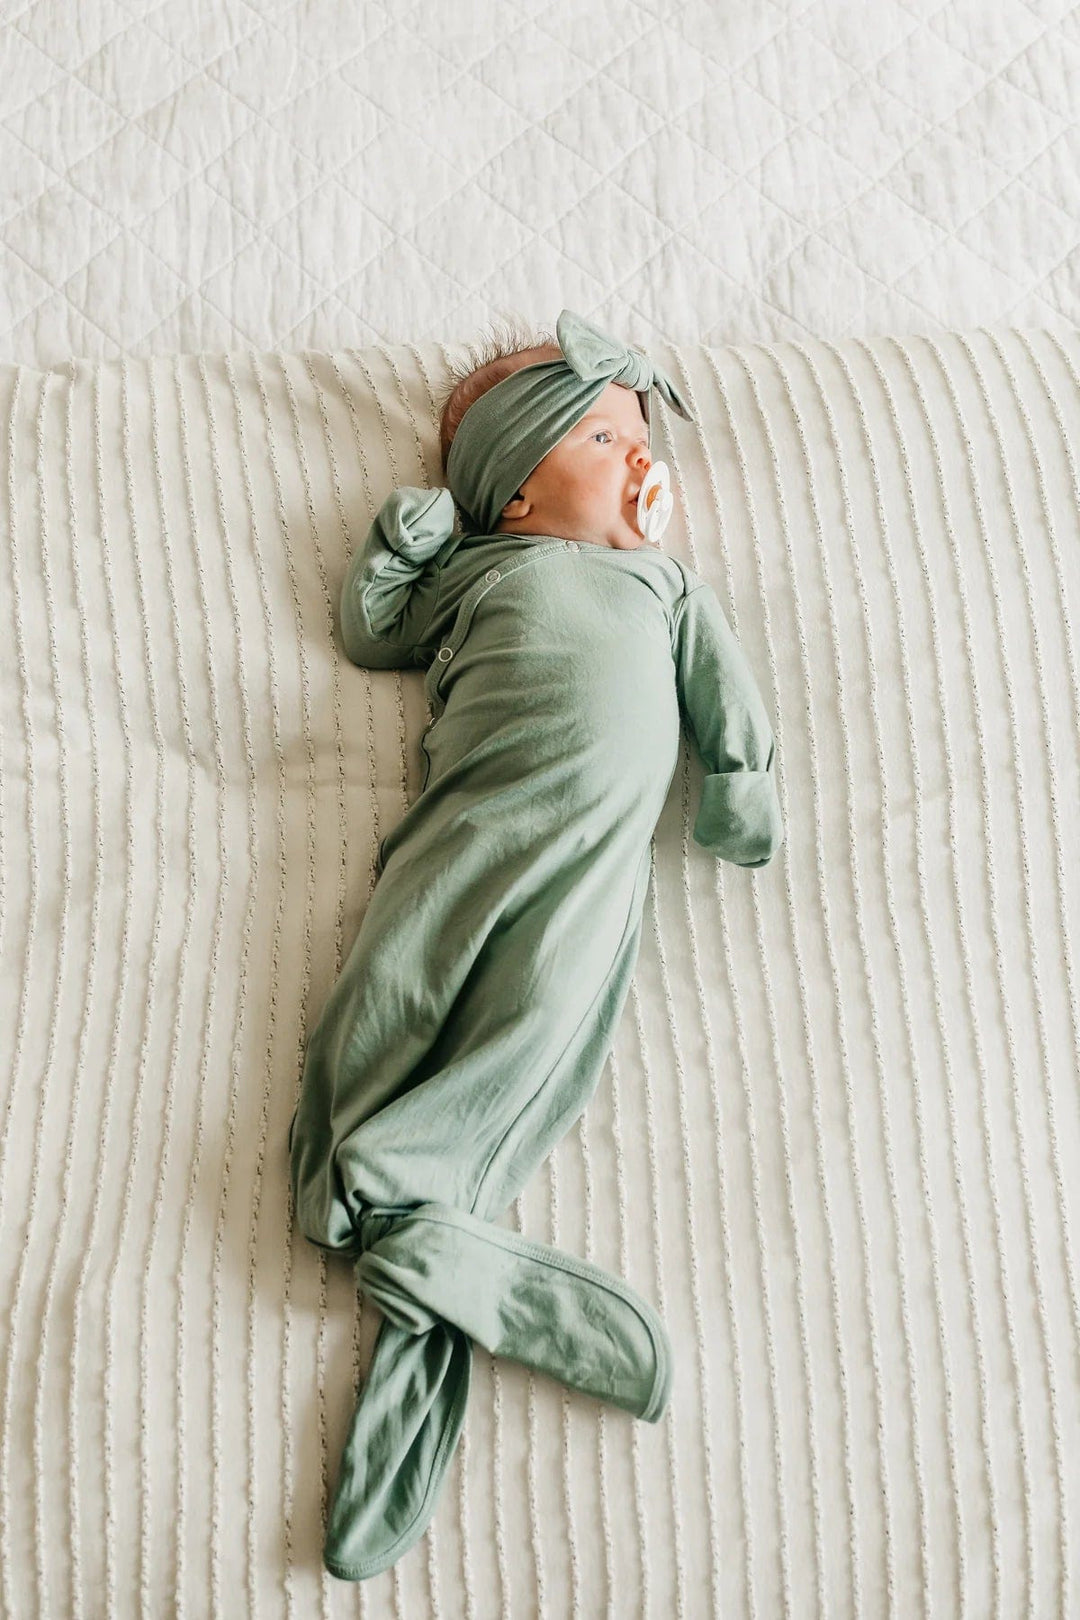 Copper Pearl Sleeping Briar Newborn Knotted Gown